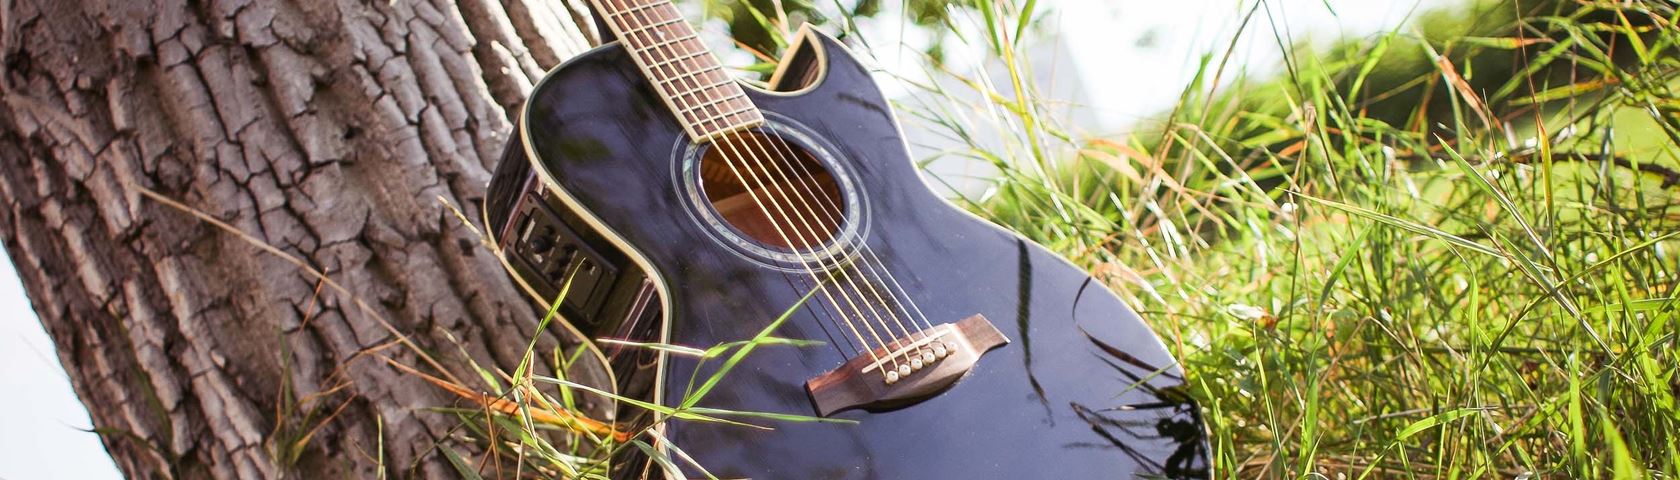 Guitar in the Grass